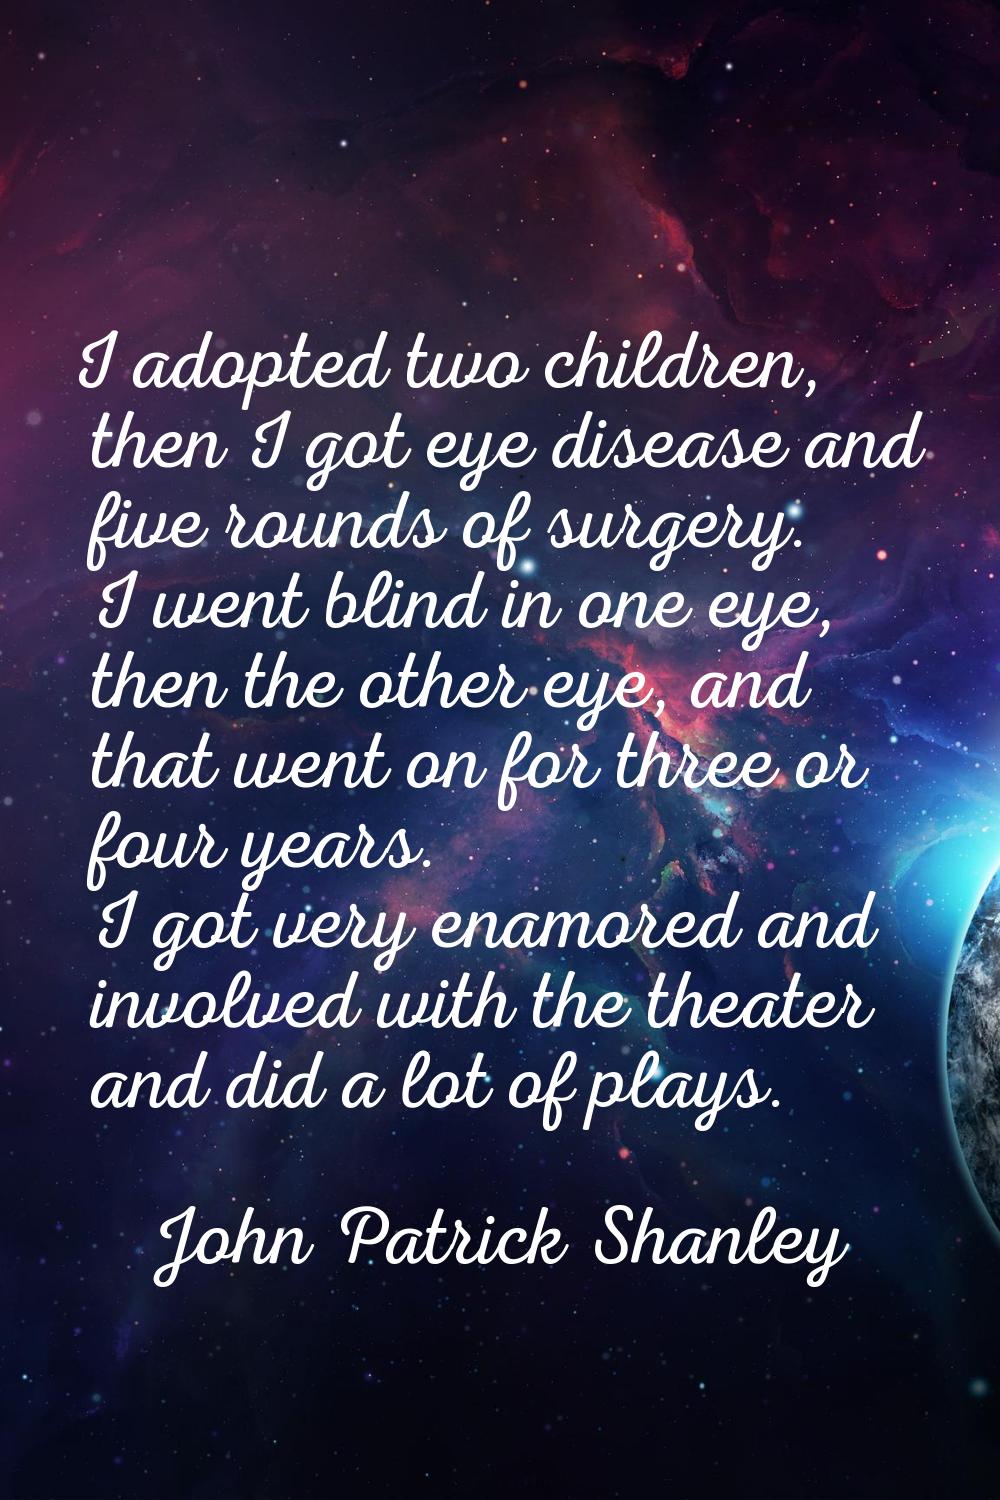 I adopted two children, then I got eye disease and five rounds of surgery. I went blind in one eye,